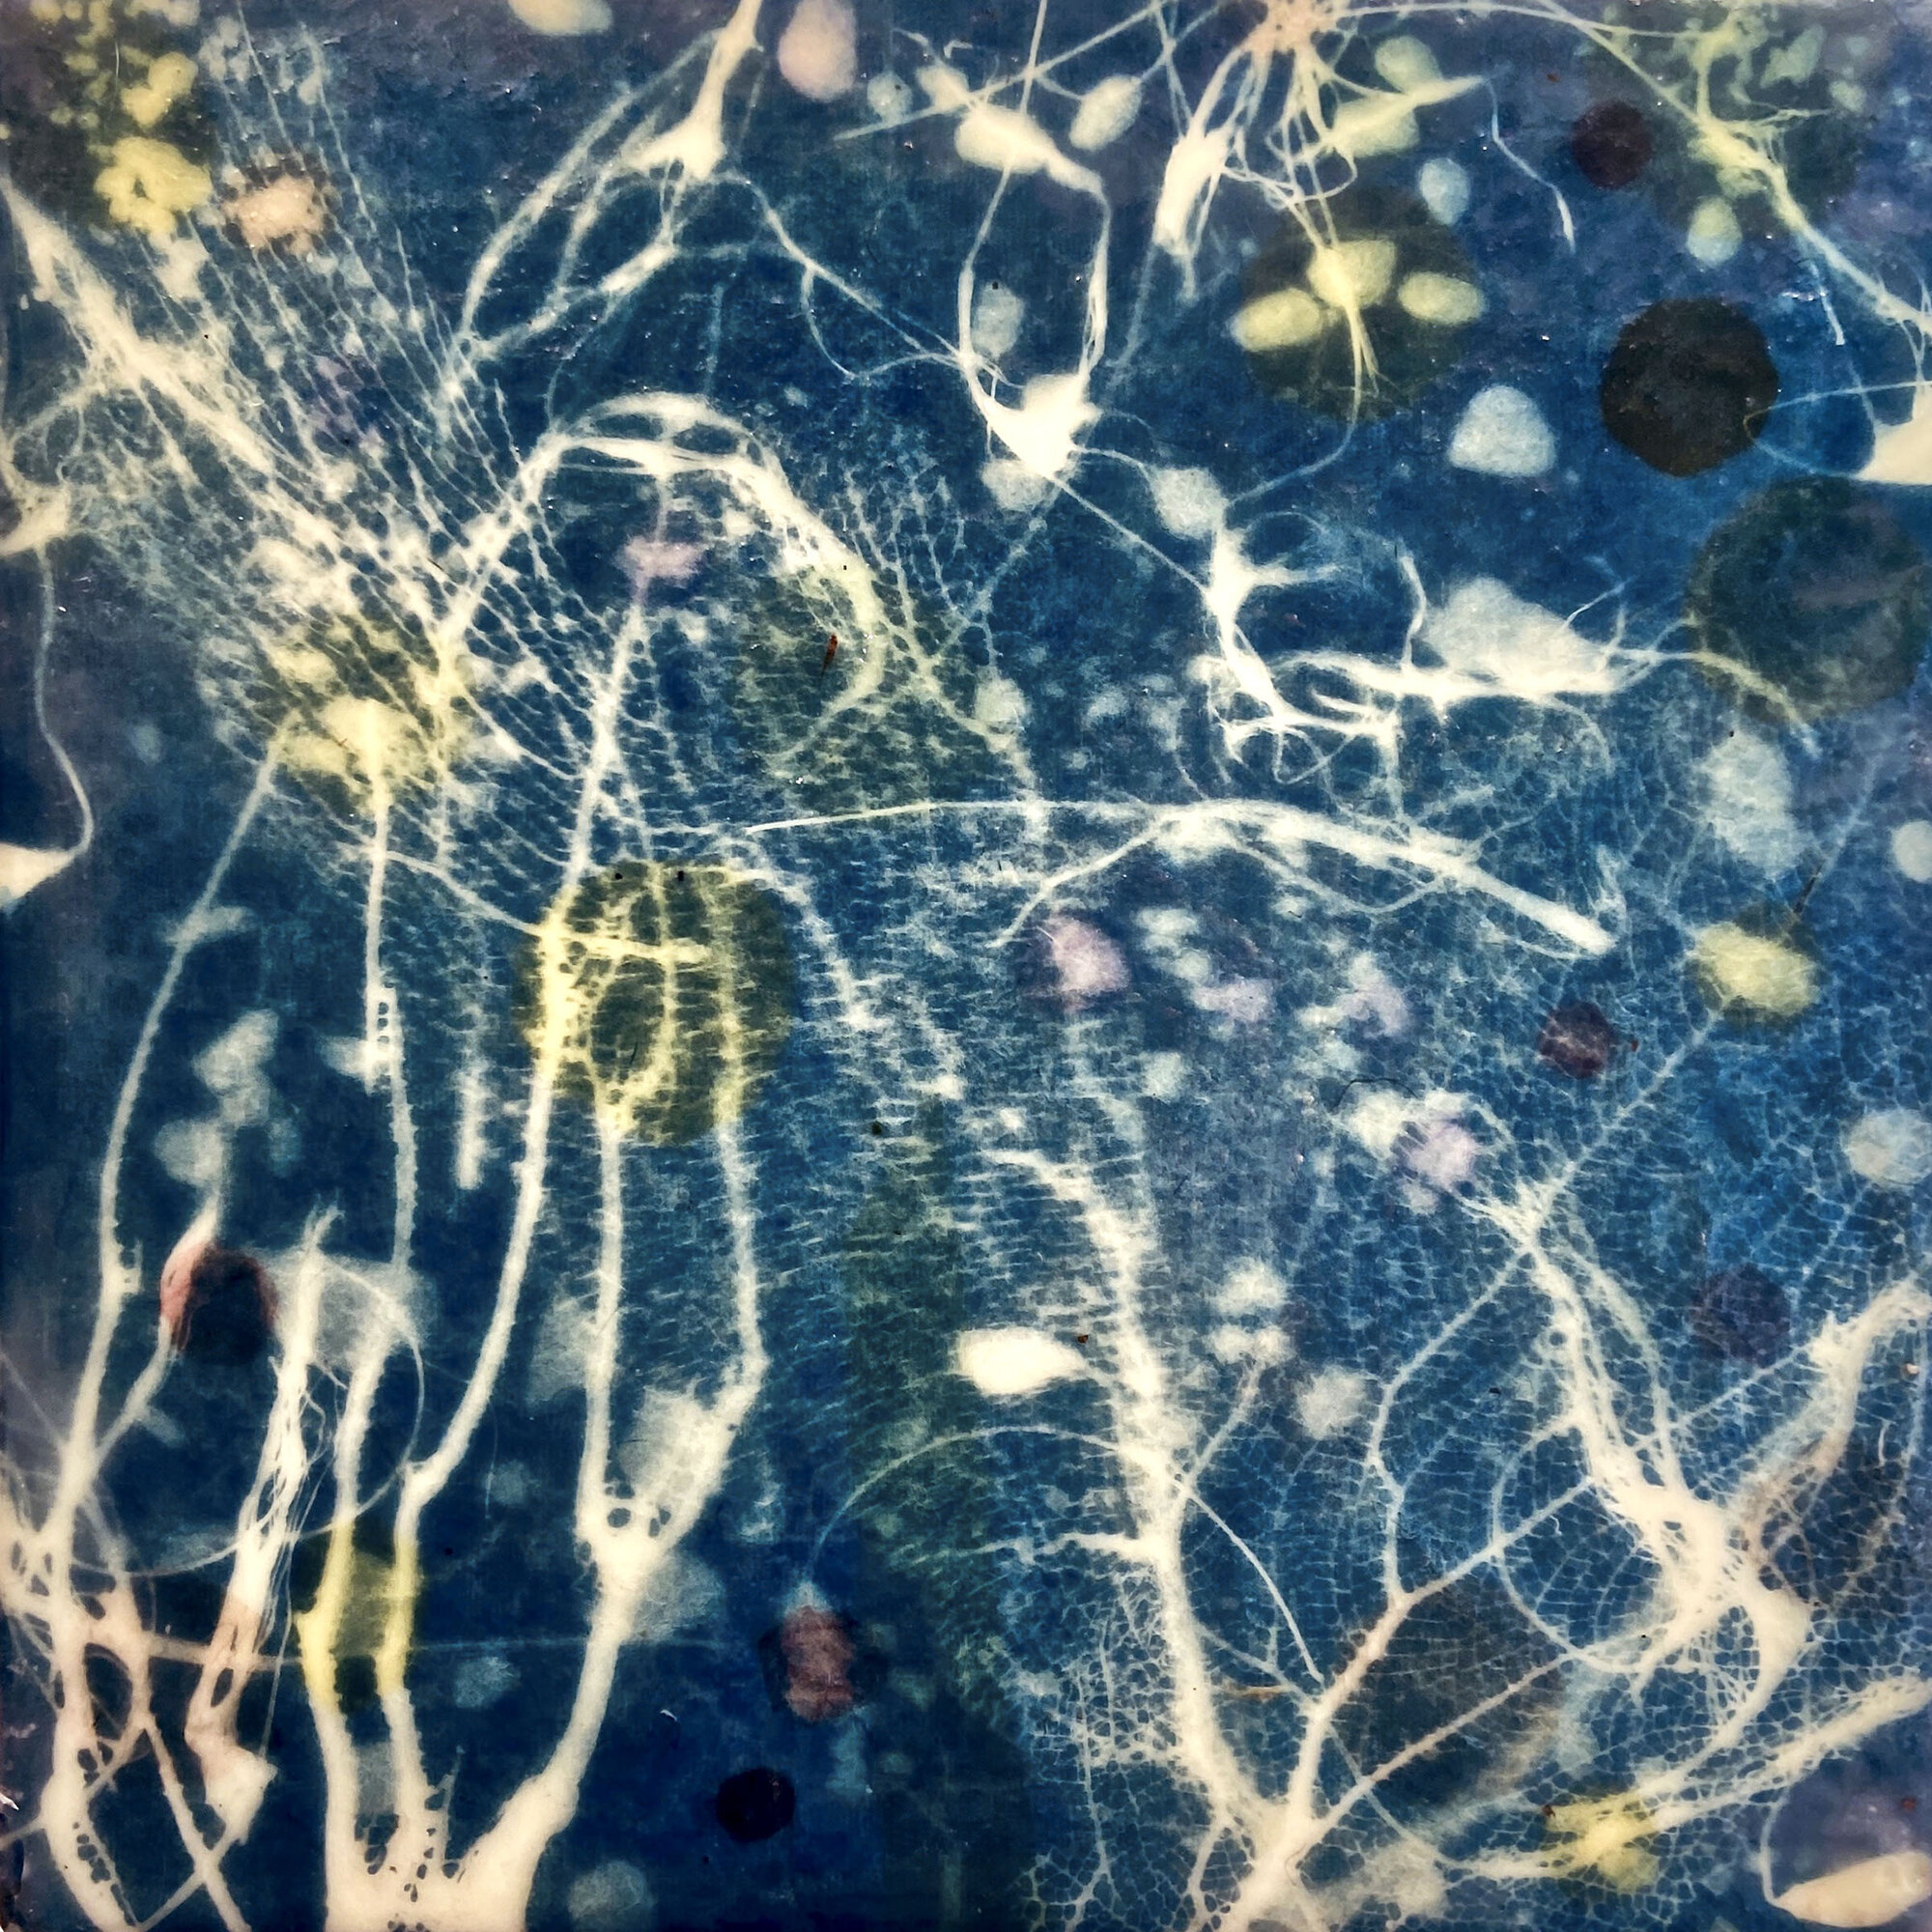   Tobago Coral II, 2020   Cyanotype on Japanese rice paper, colored Japanese rice papers, wax,  encaustic board   10” x 10” 